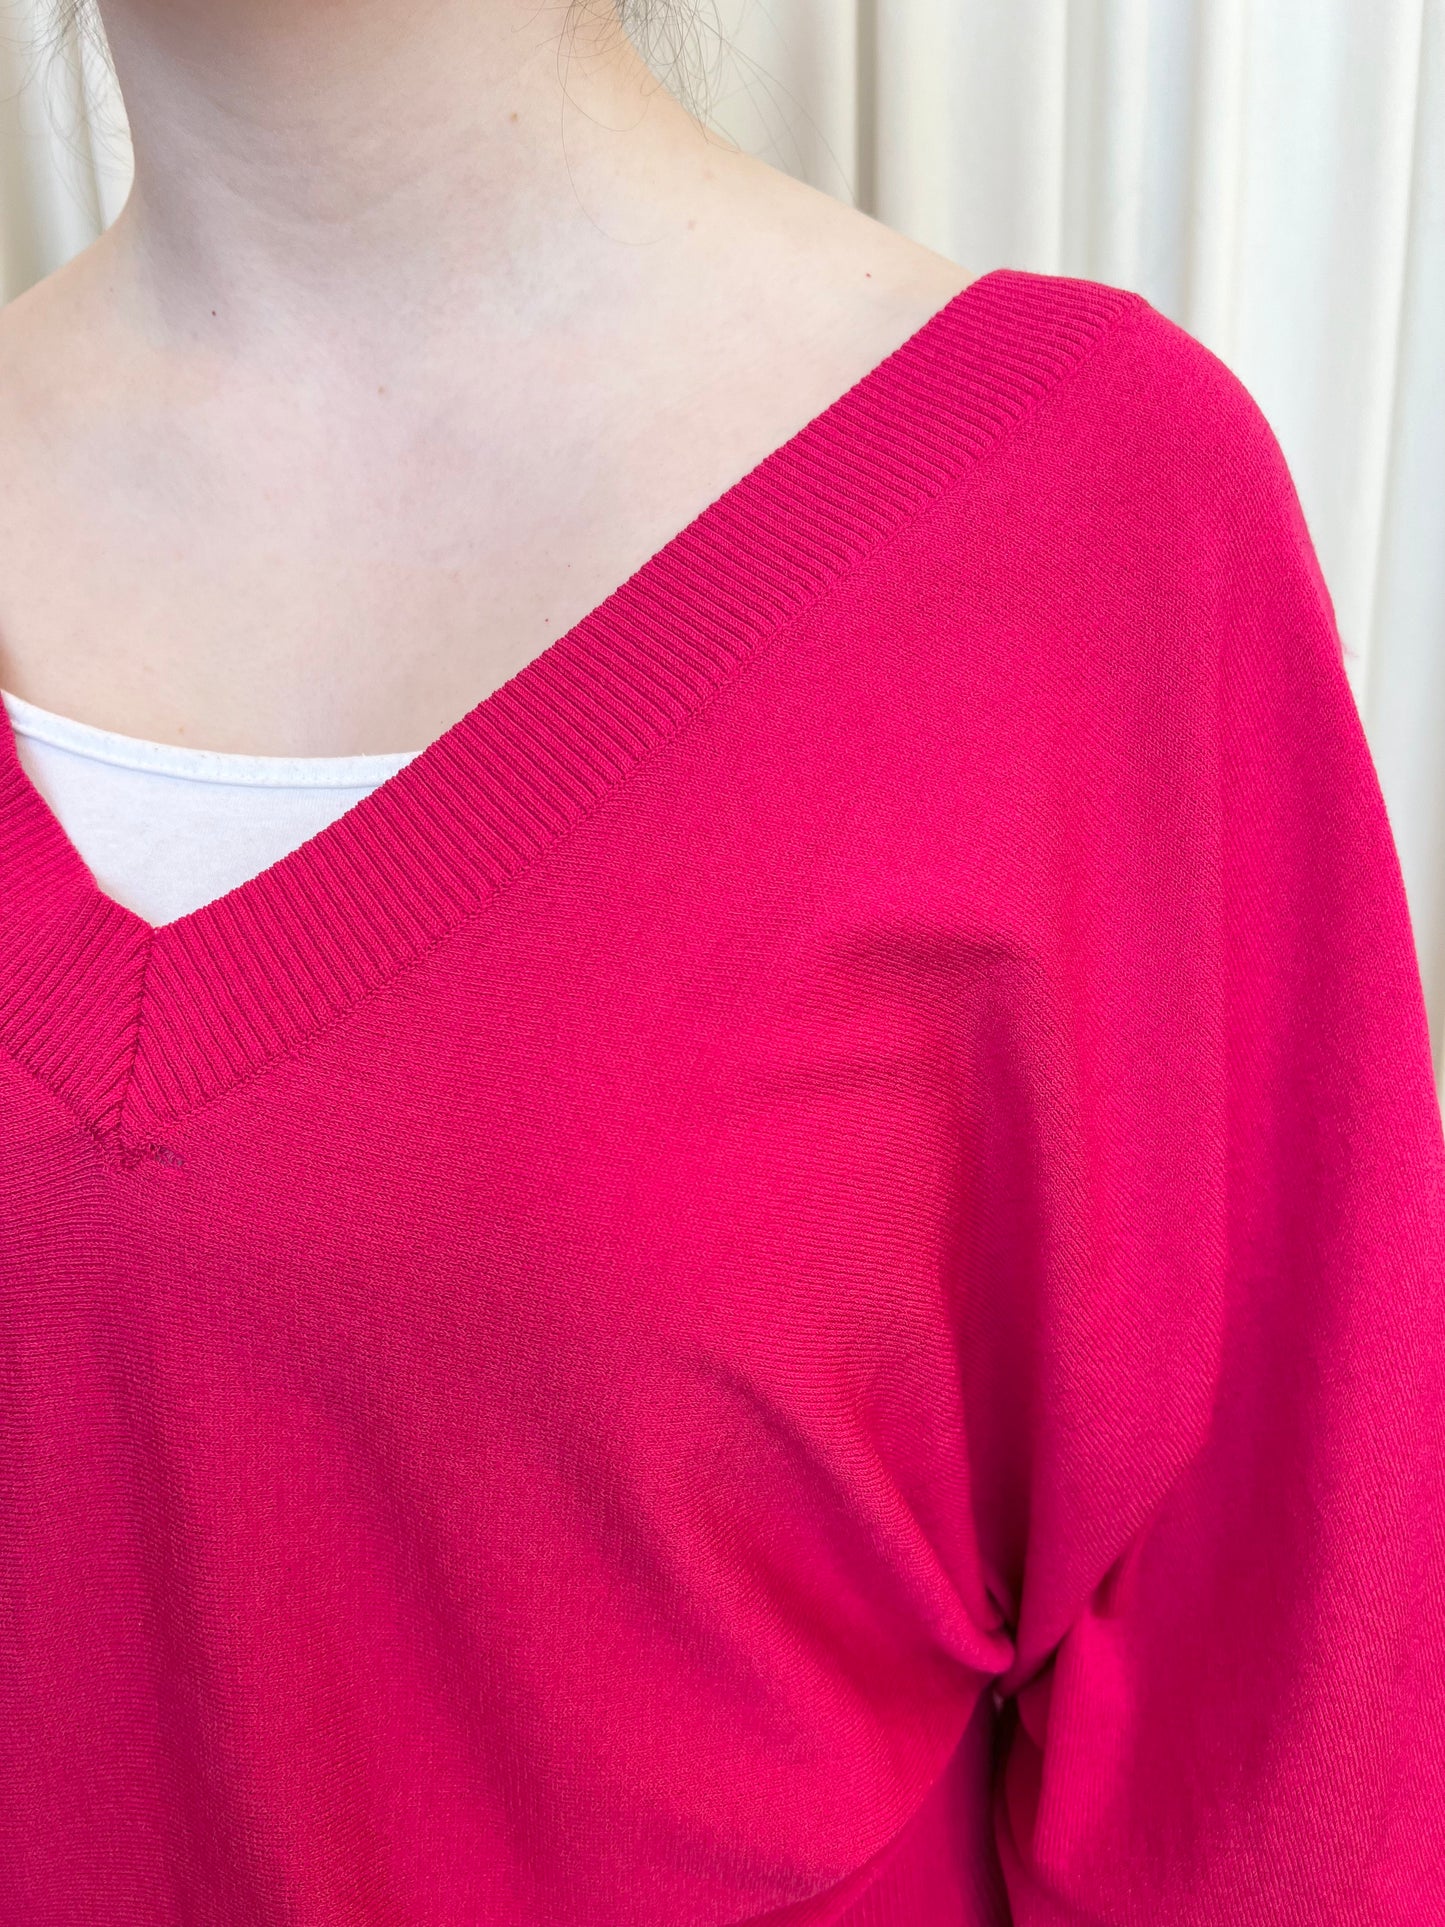 Hot Pink V Neck Sweater - Small